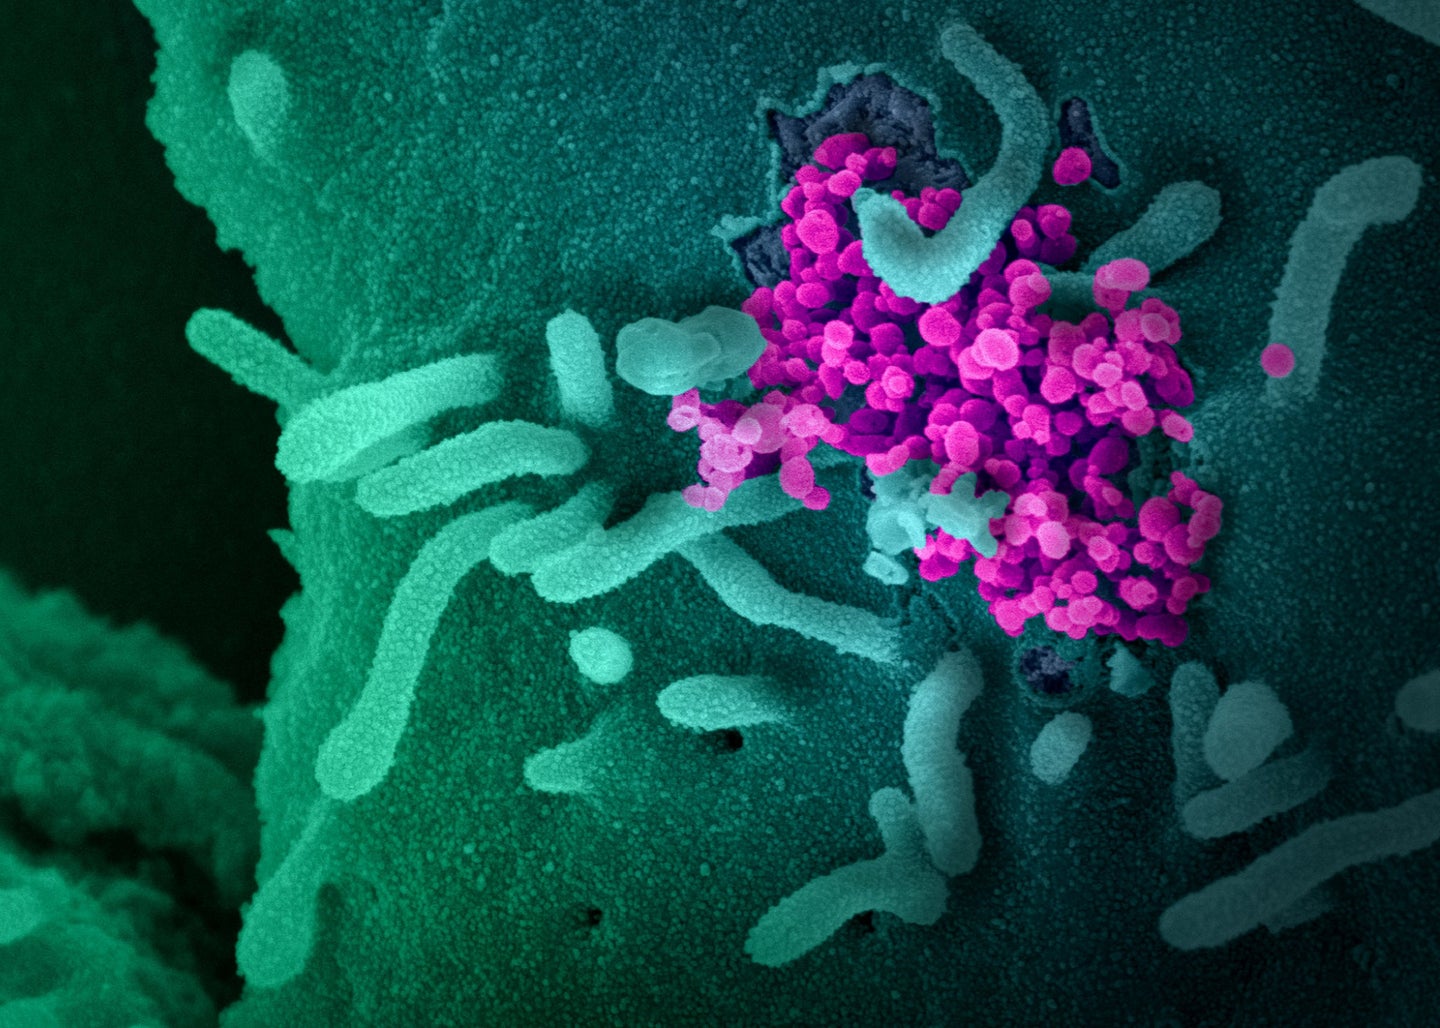 SARS-CoV-2 or COVID virus infecting human cells in a green and purple microscopy image